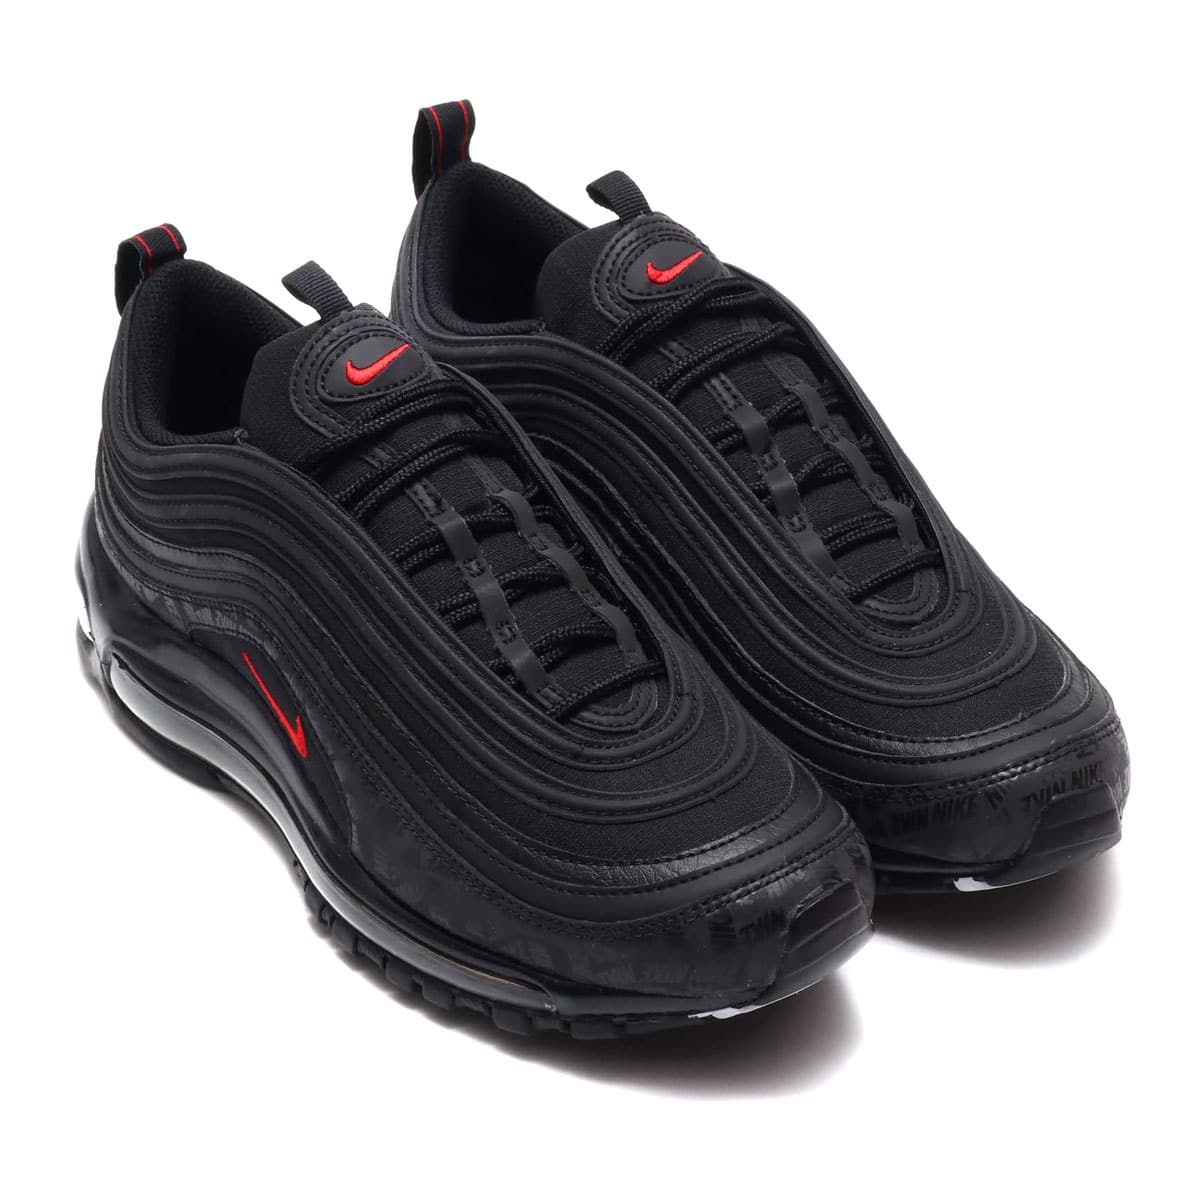 97 red and black